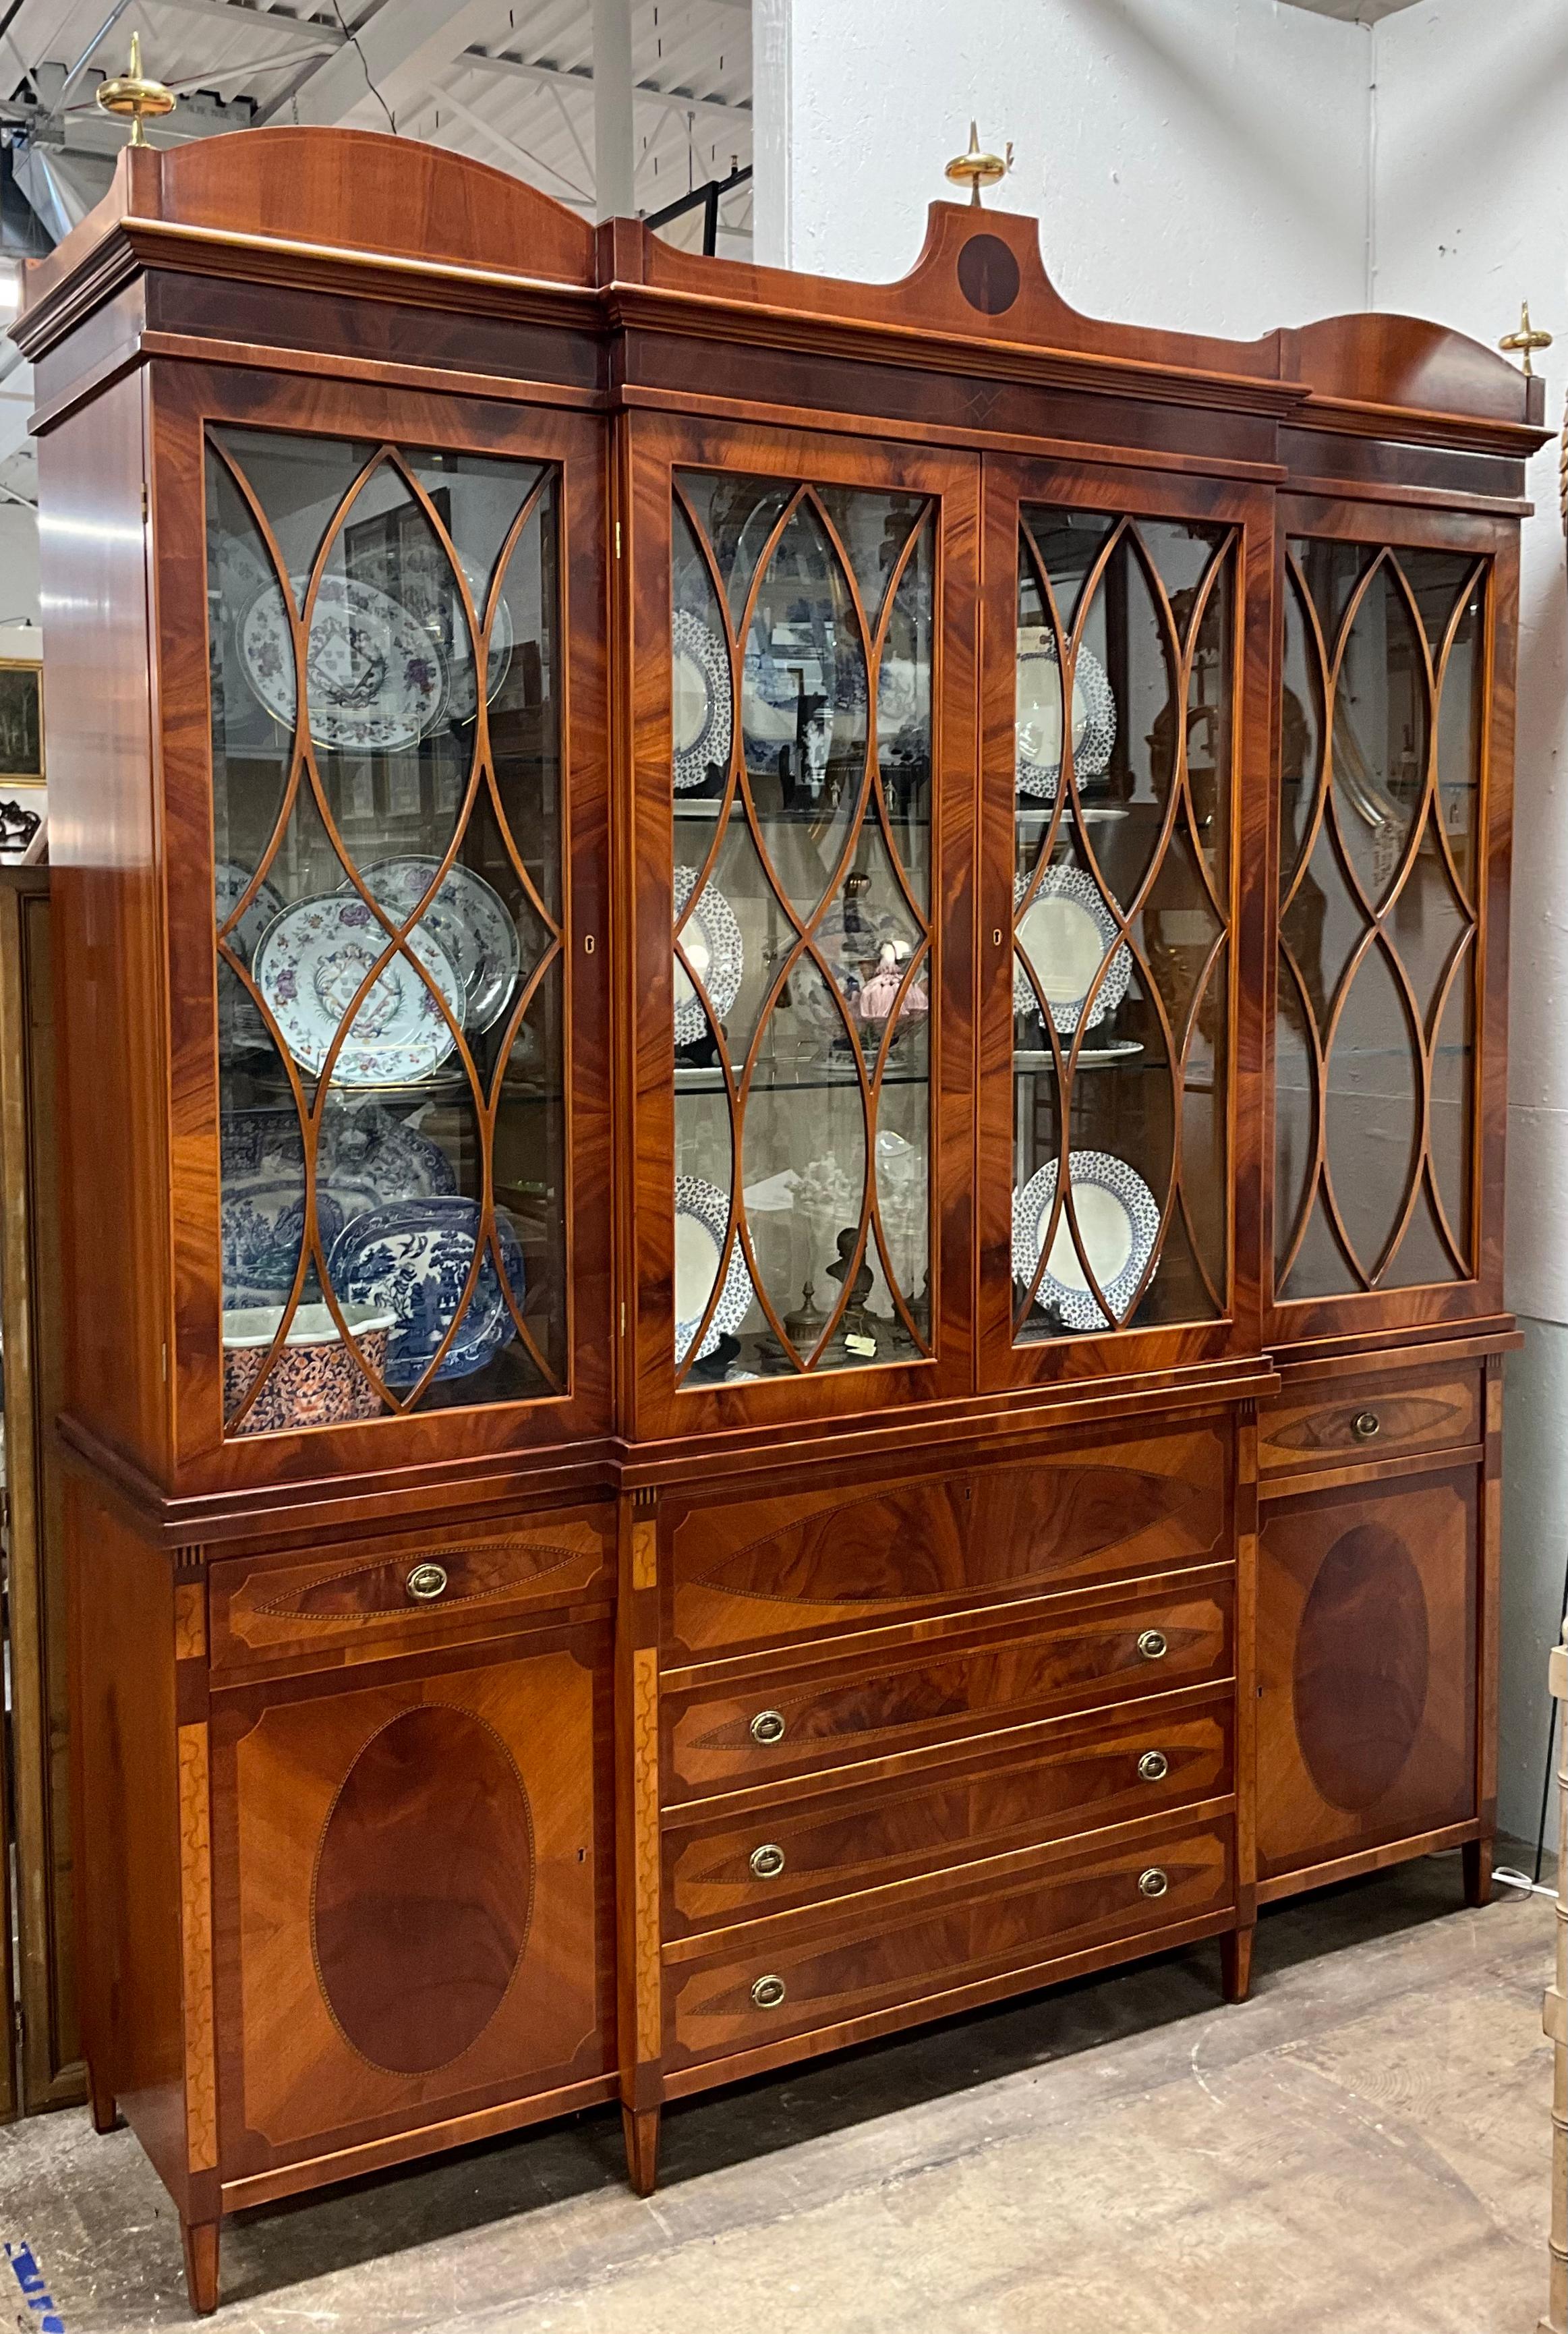 This is a fabulous cabinet! It is an Italian cabinet by Decorative Crafts. It is a combination of satinwood, mahogany, and cherry woods. The top portion is lined with an embossed ivory damask and is electrified with glass shelves. The piece has